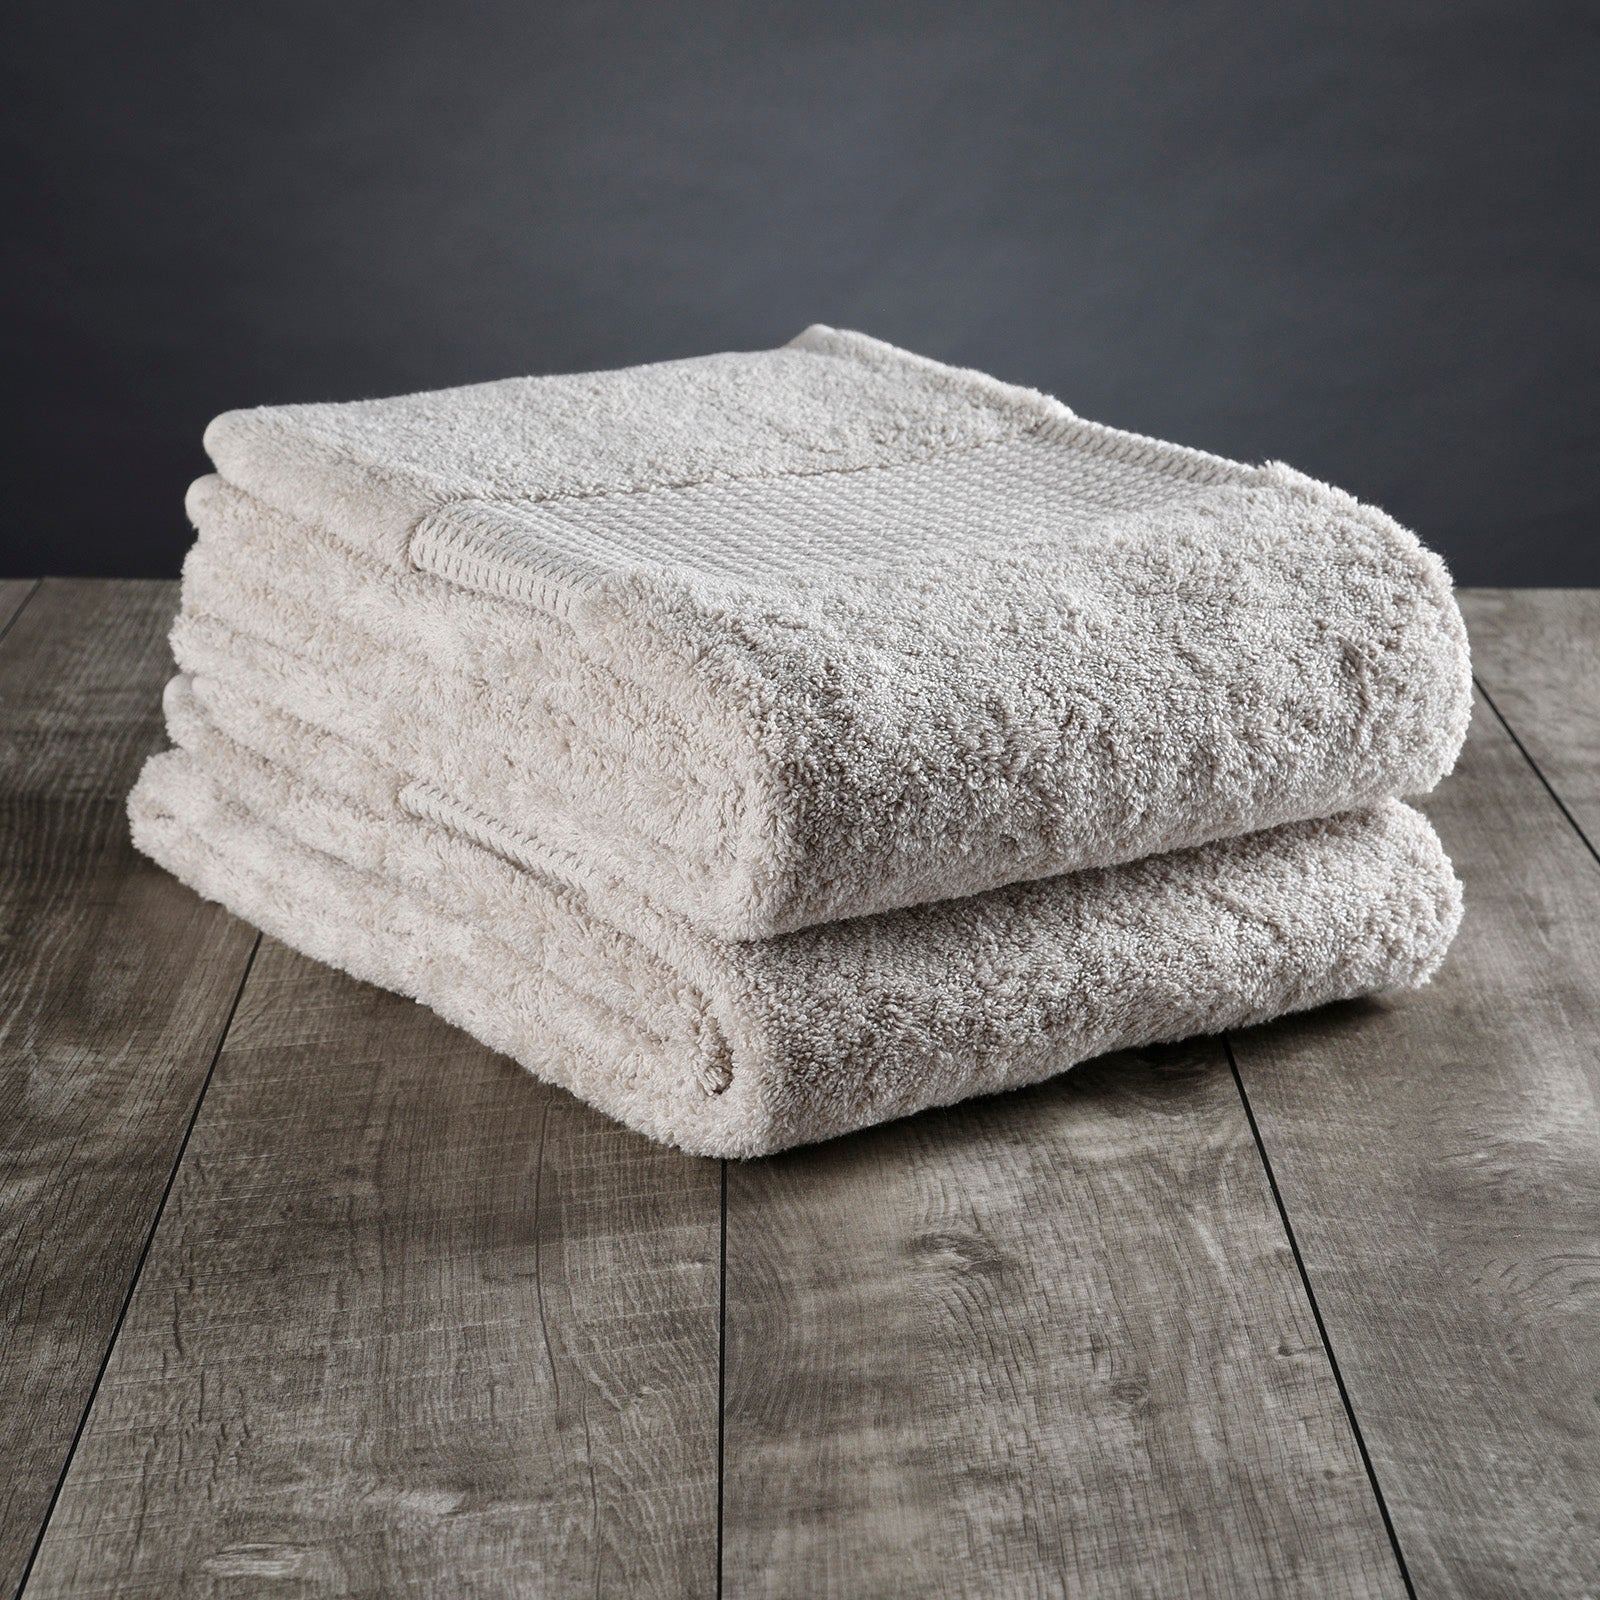 100% Organic Cotton Face Towels Collection Certifified by GOTS and Veg